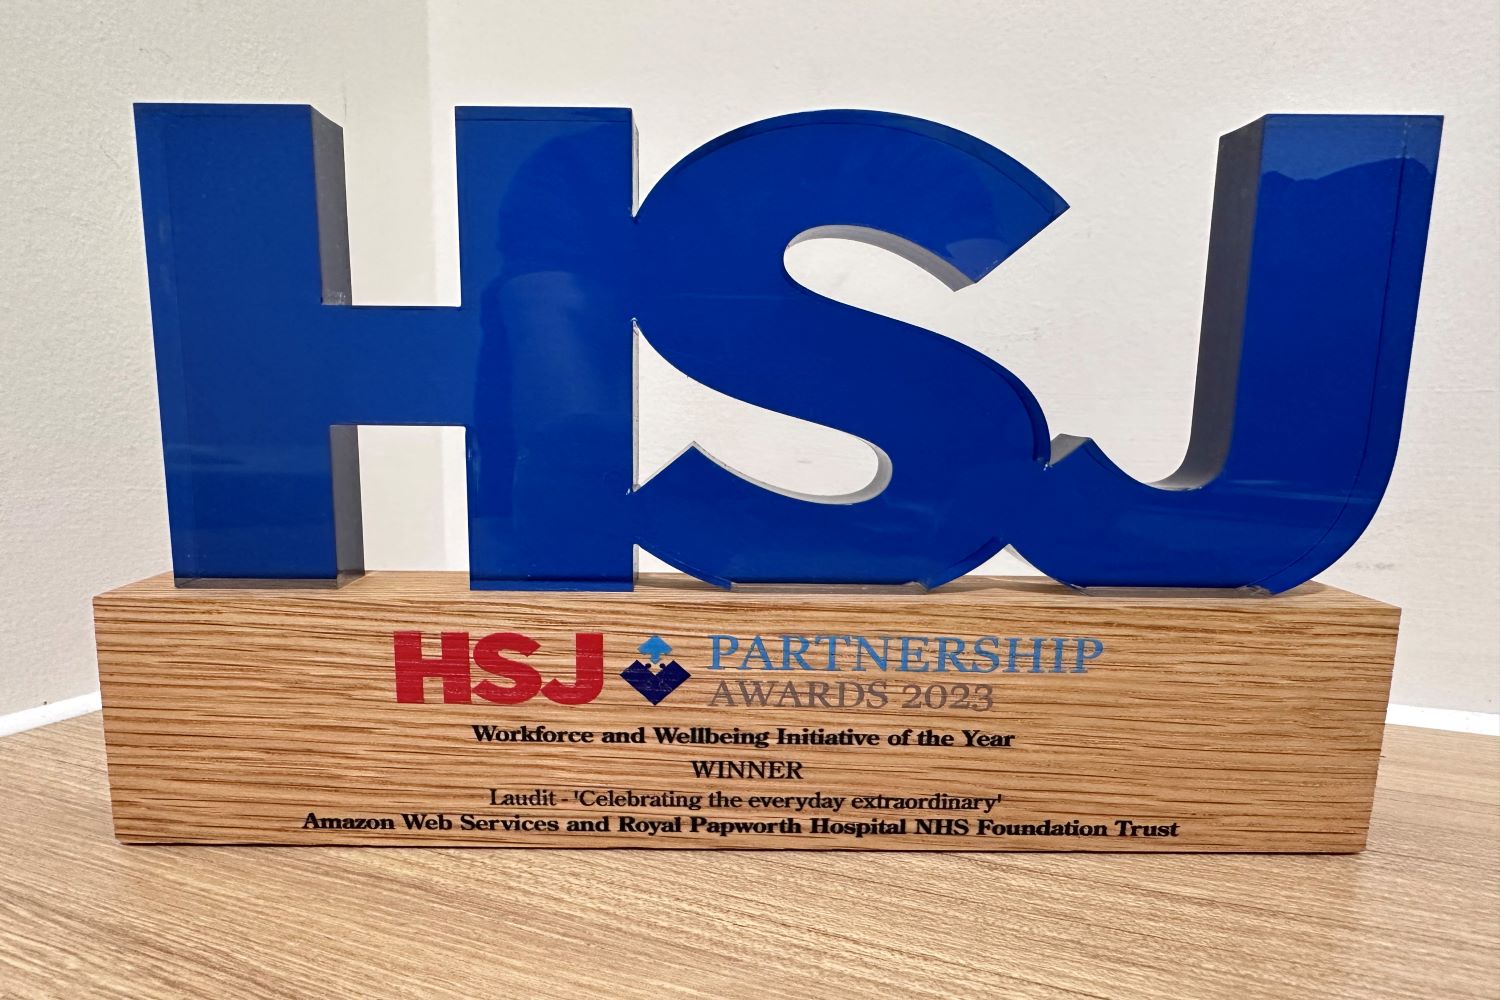 An award which has HSJ in blue letters upon a wooden block.